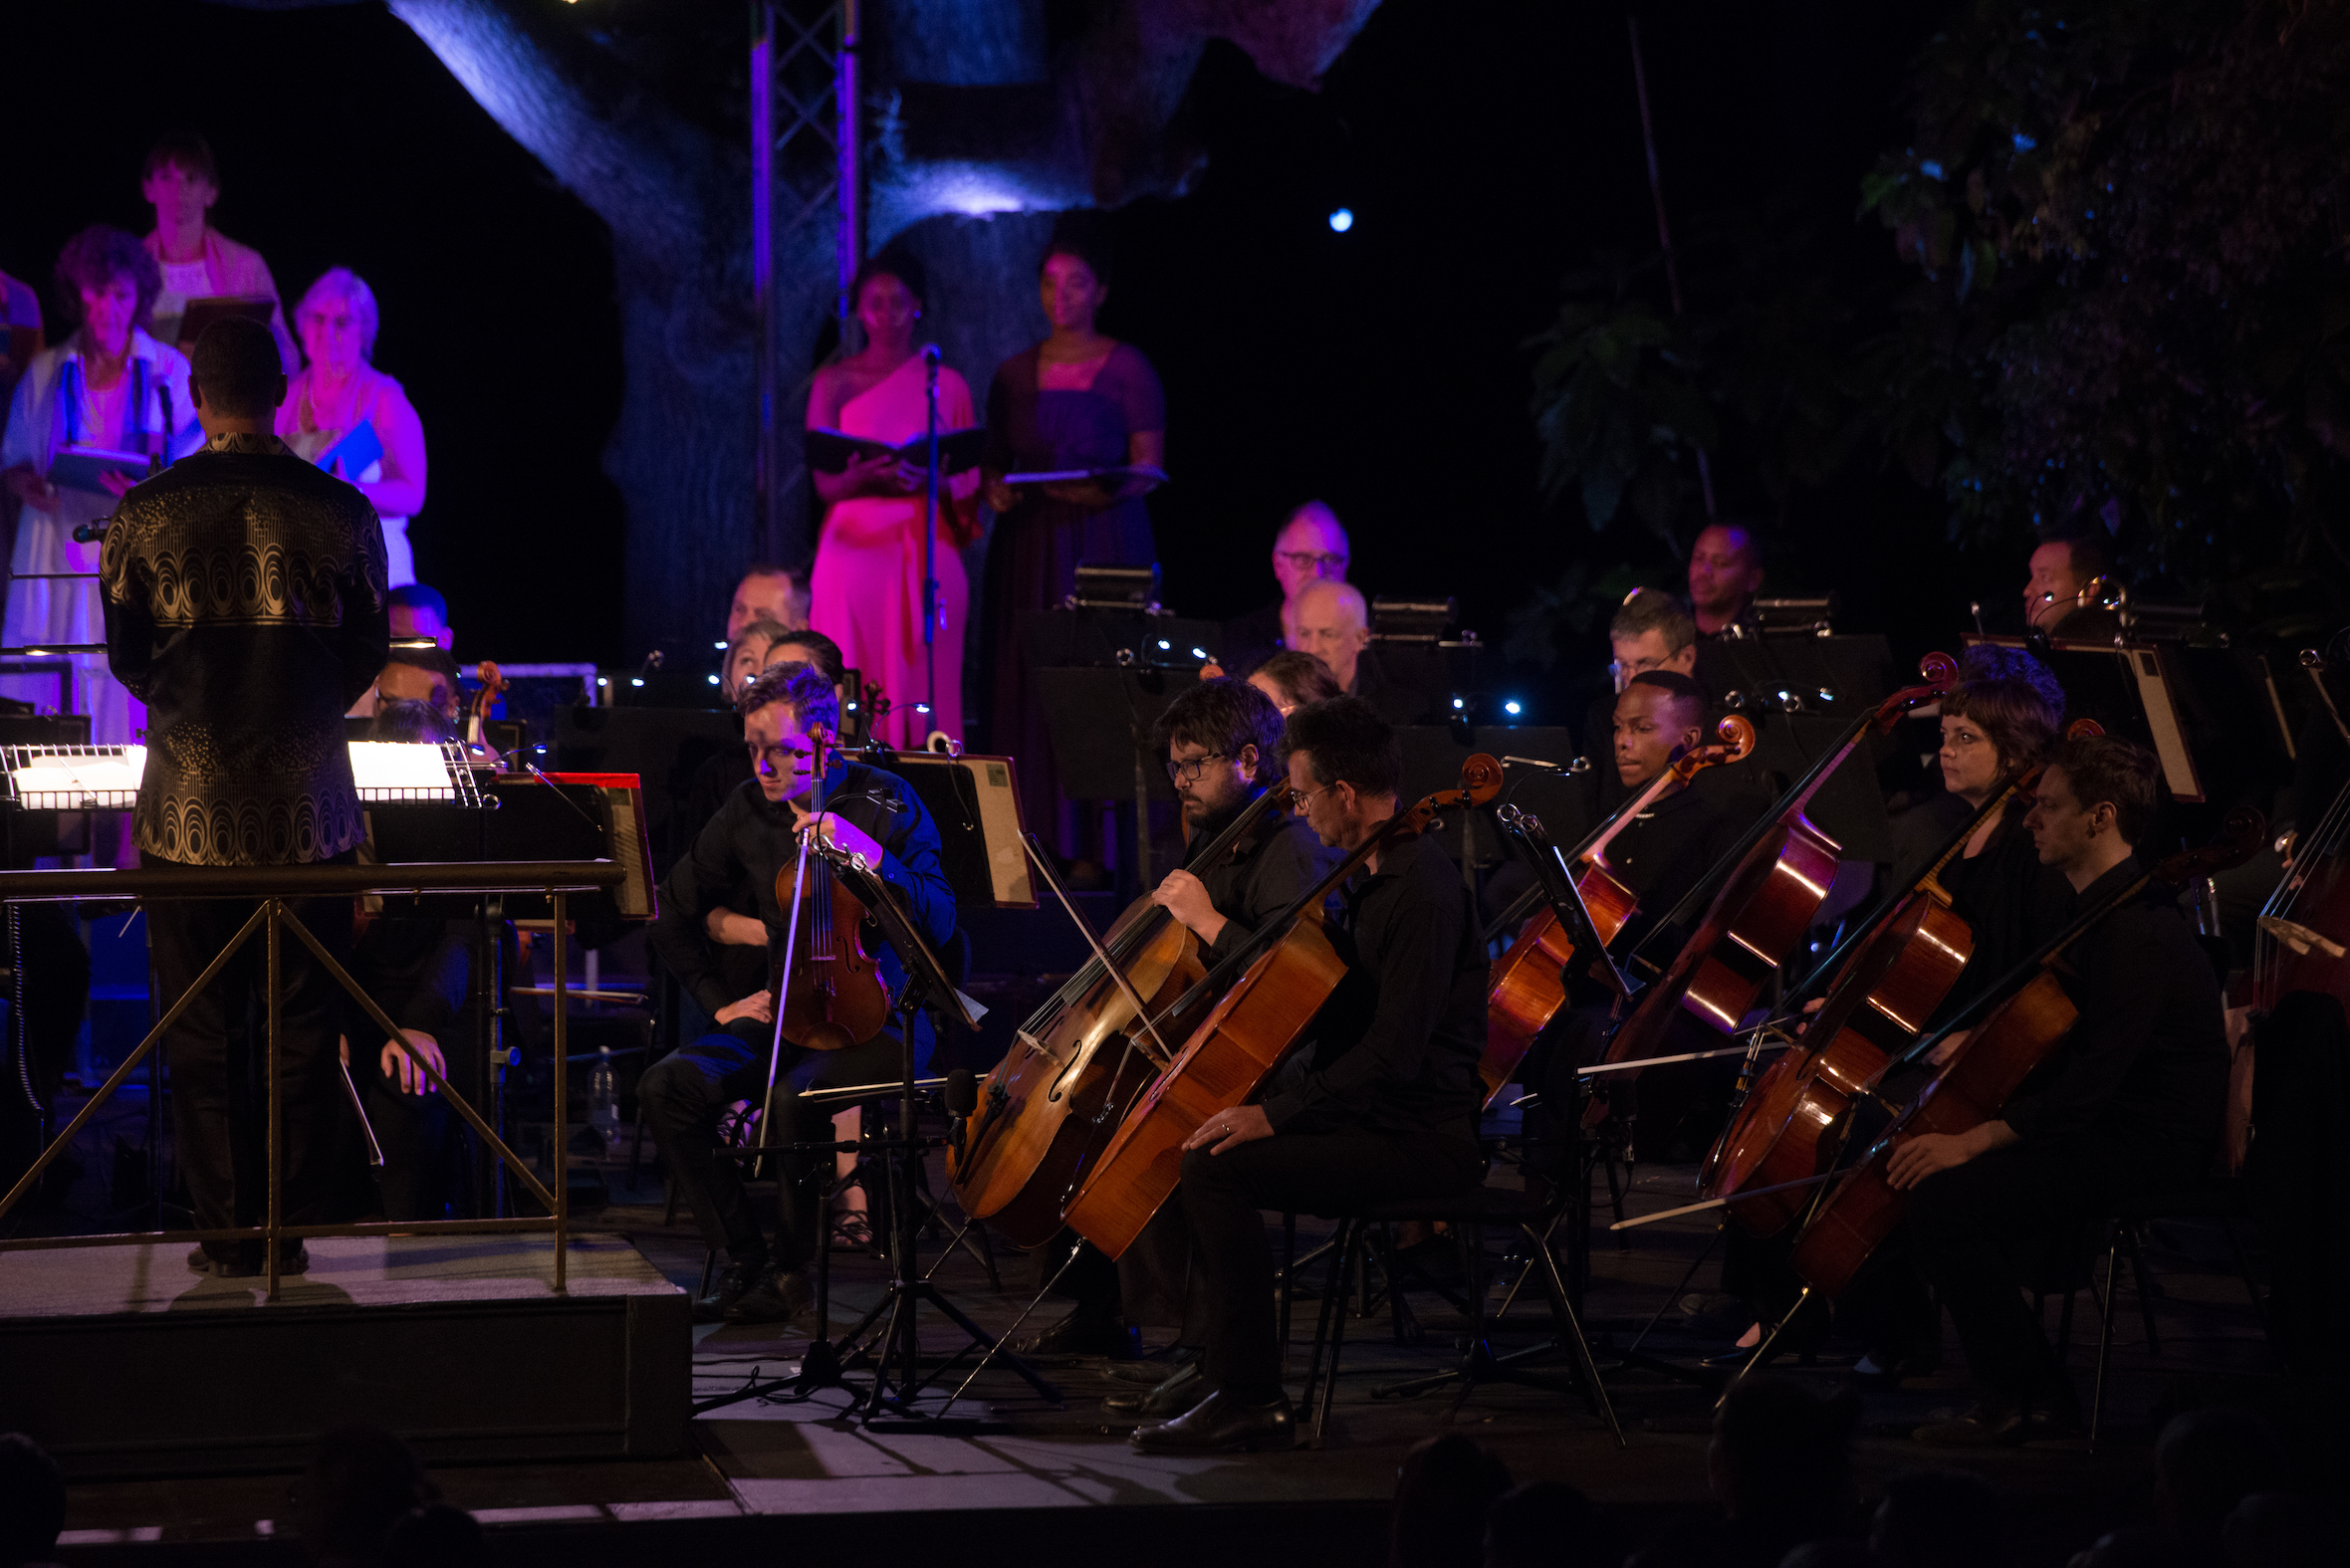 Conductor Brandon Phillips (left) and members of the Cape Town Philharmonic Orchestra performing ‘A Midsummer Night’s Dream’ at Maynardville. Image: Jeanine Bresler